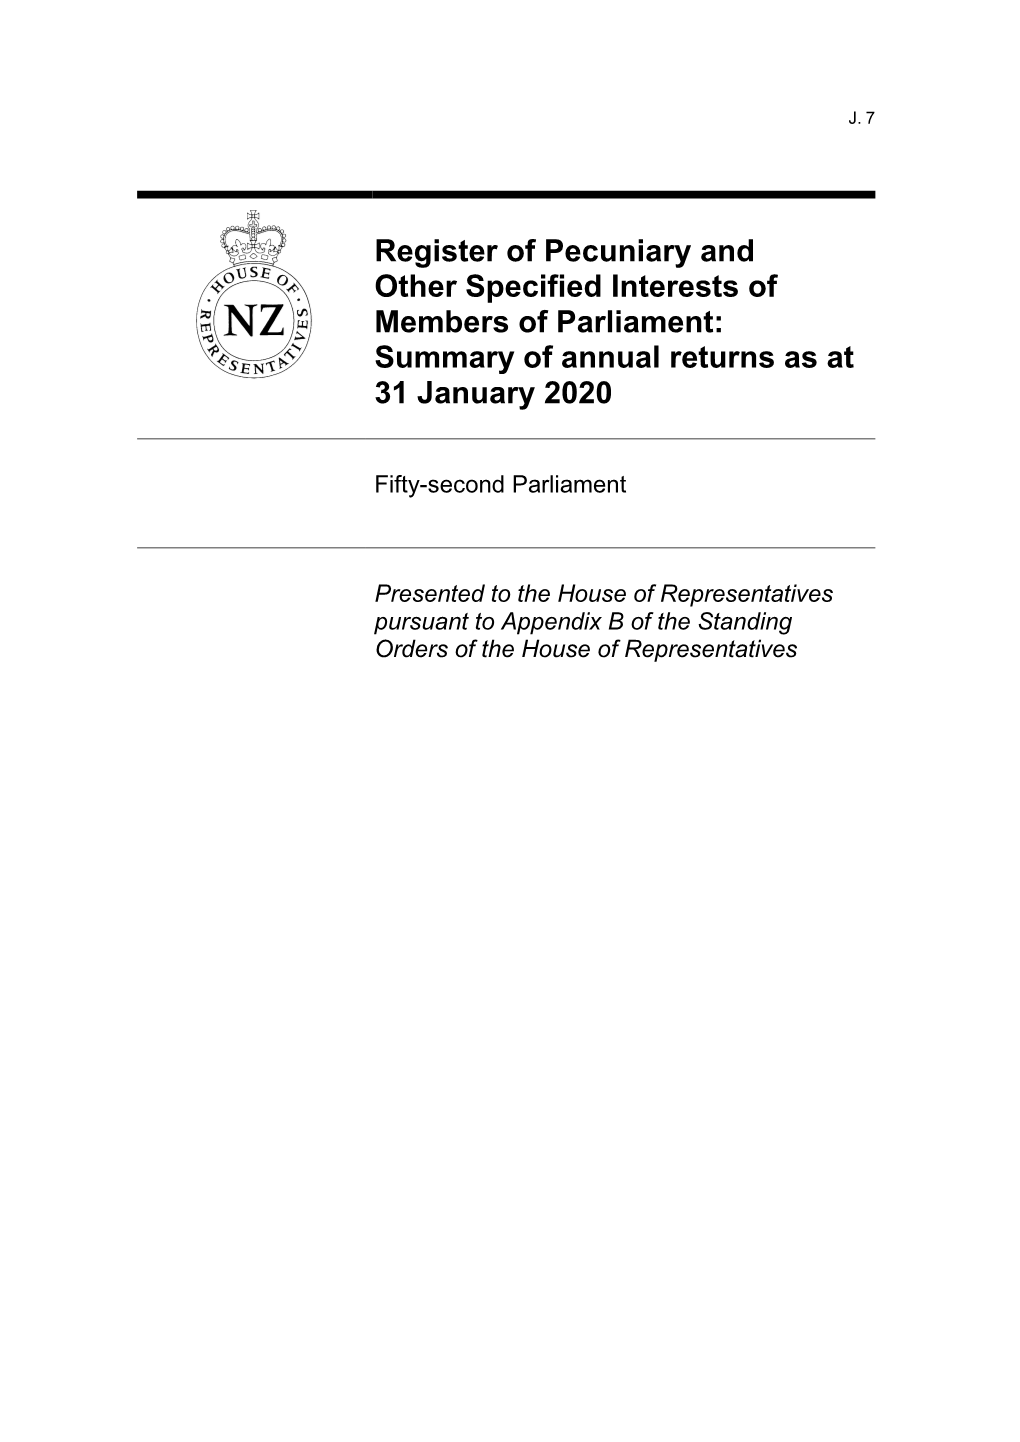 Register of Pecuniary and Other Specified Interests of Members of Parliament: Summary of Annual Returns As at 31 January 2020